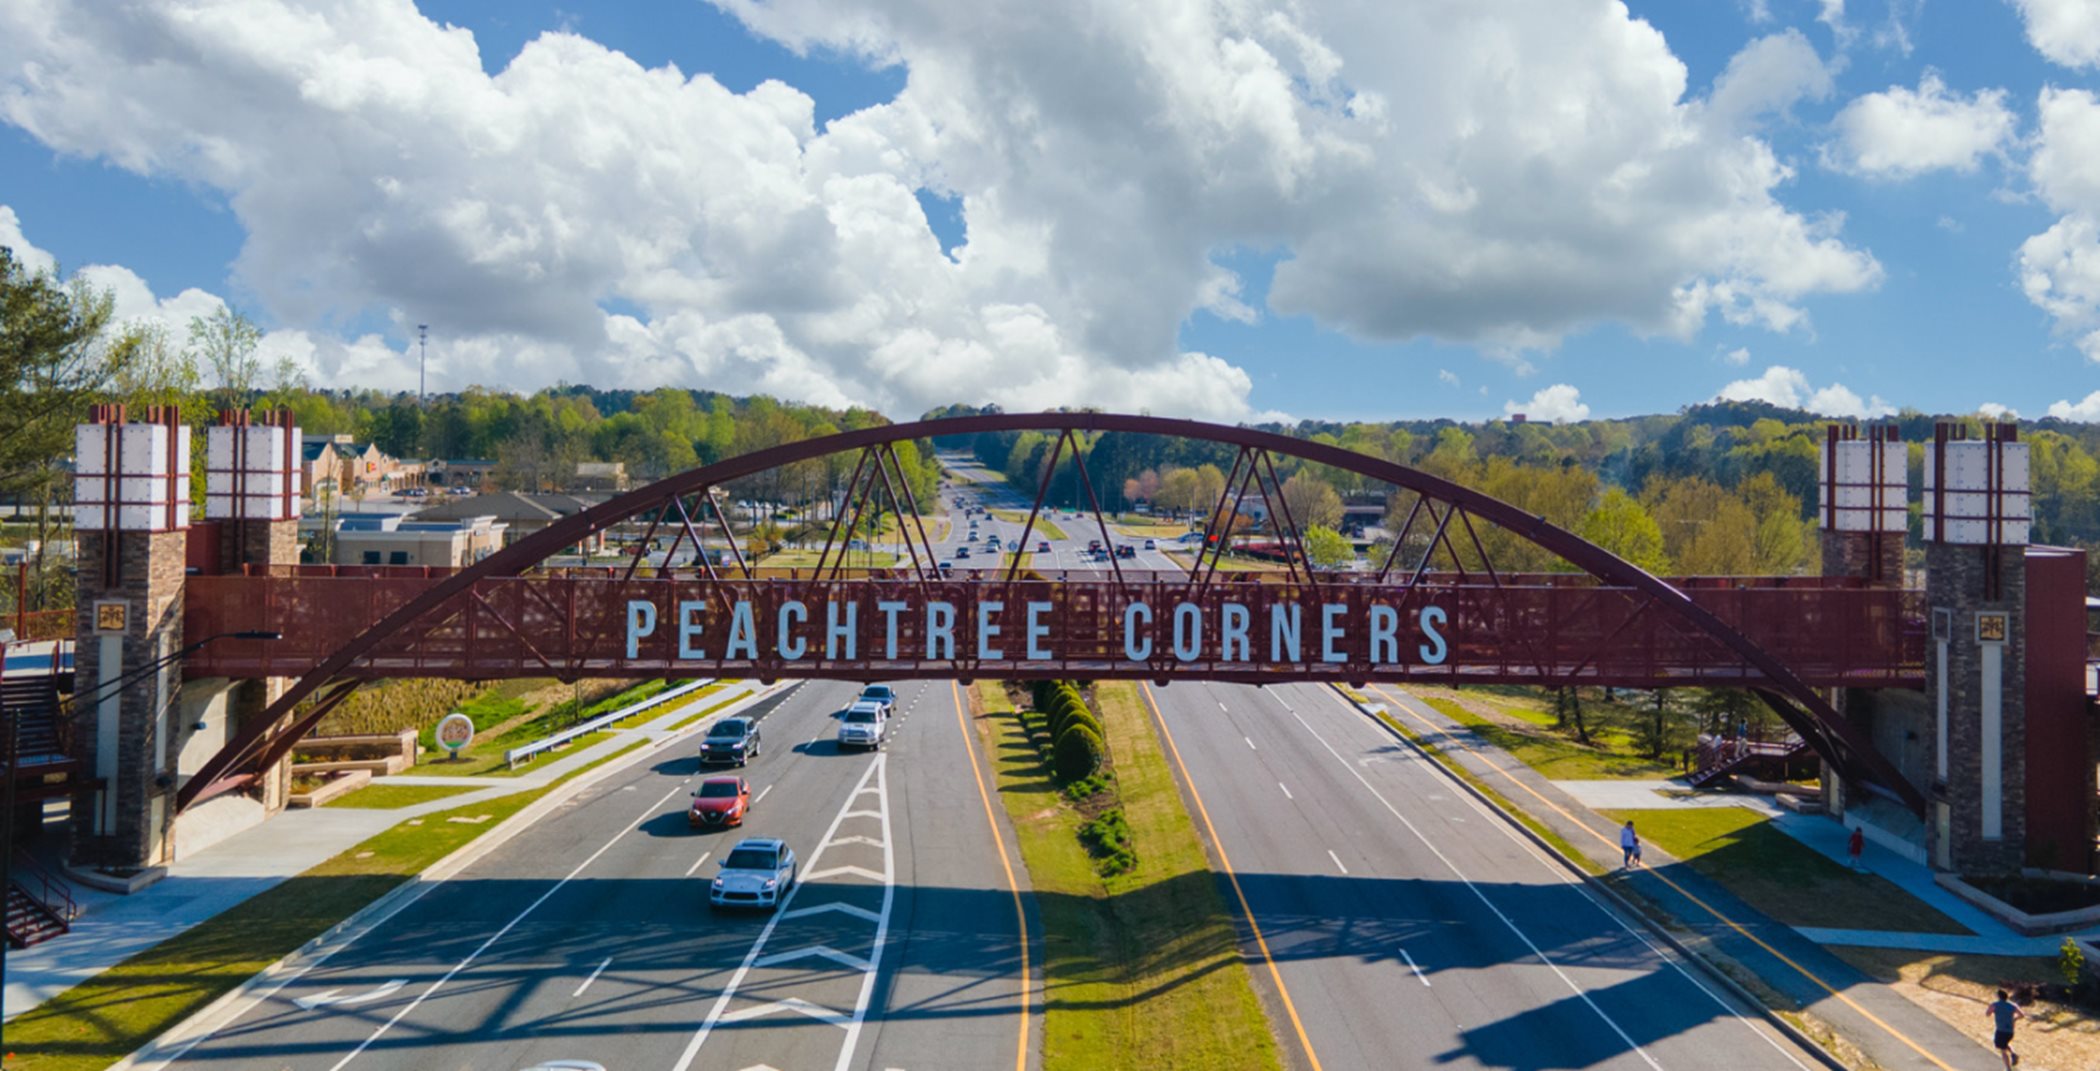 Peachtree Corners hotels and restaurants 